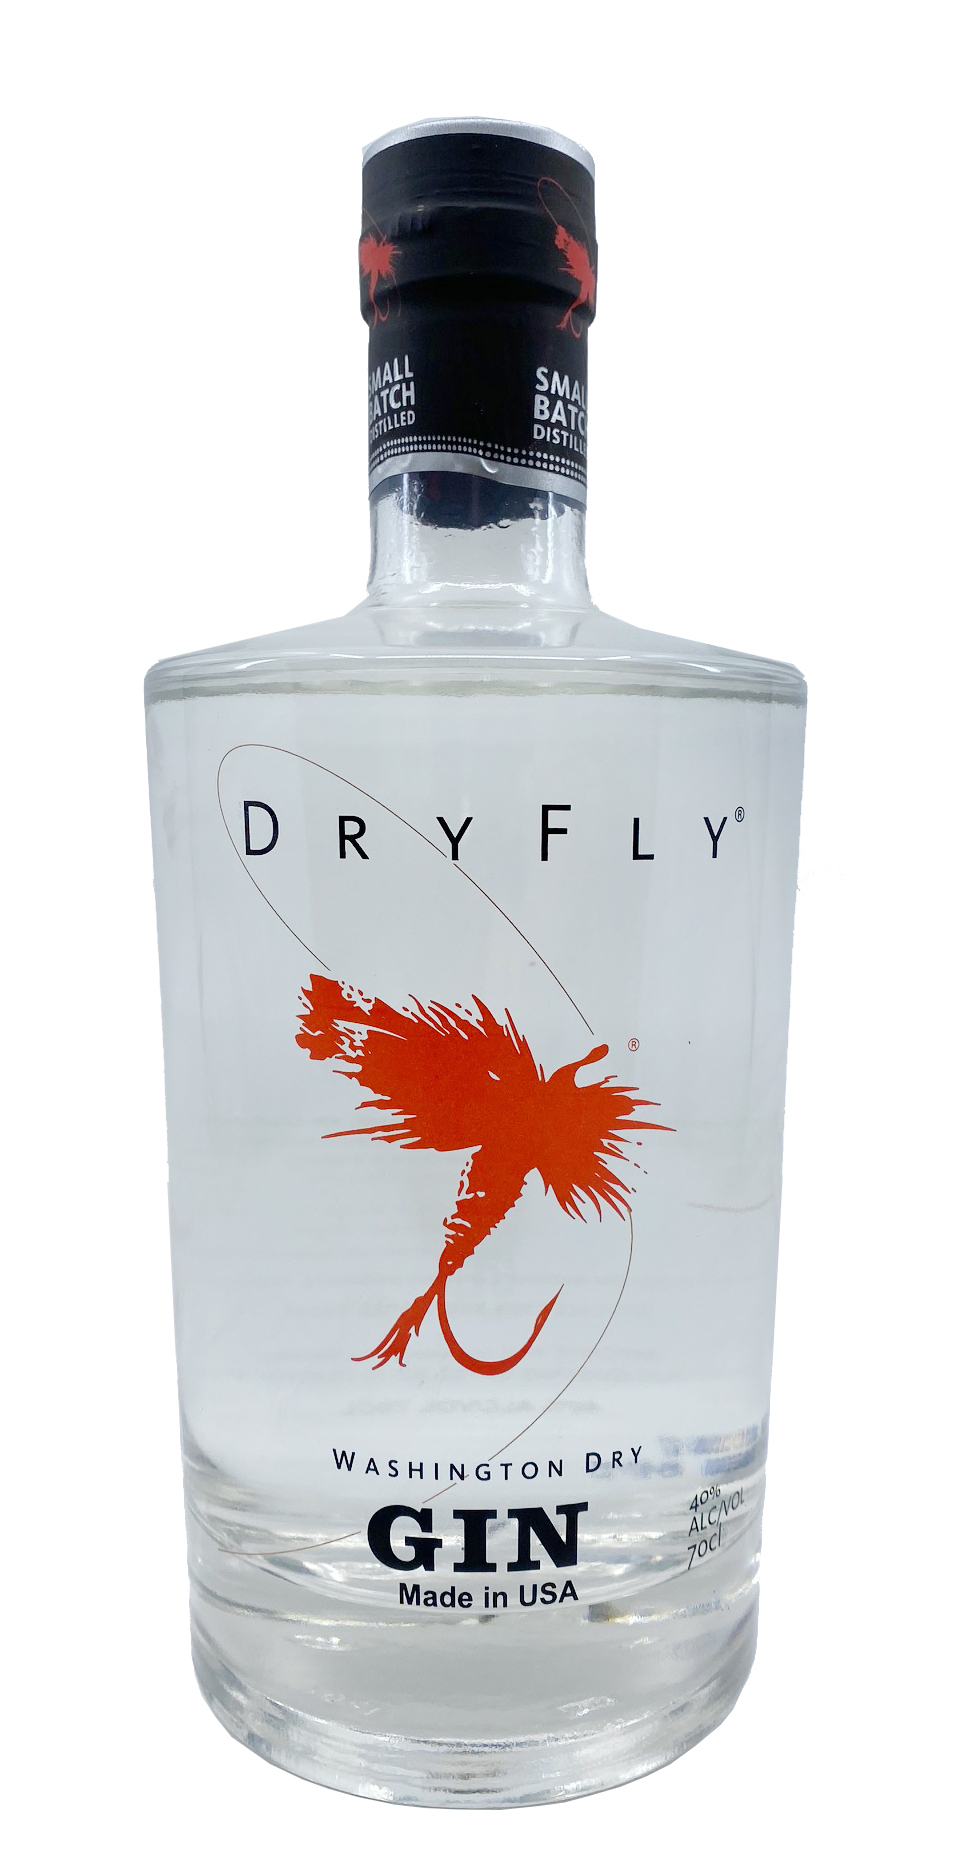 Dry Fly Washington Dry Gin - Made in USA 0,7l 40%vol.